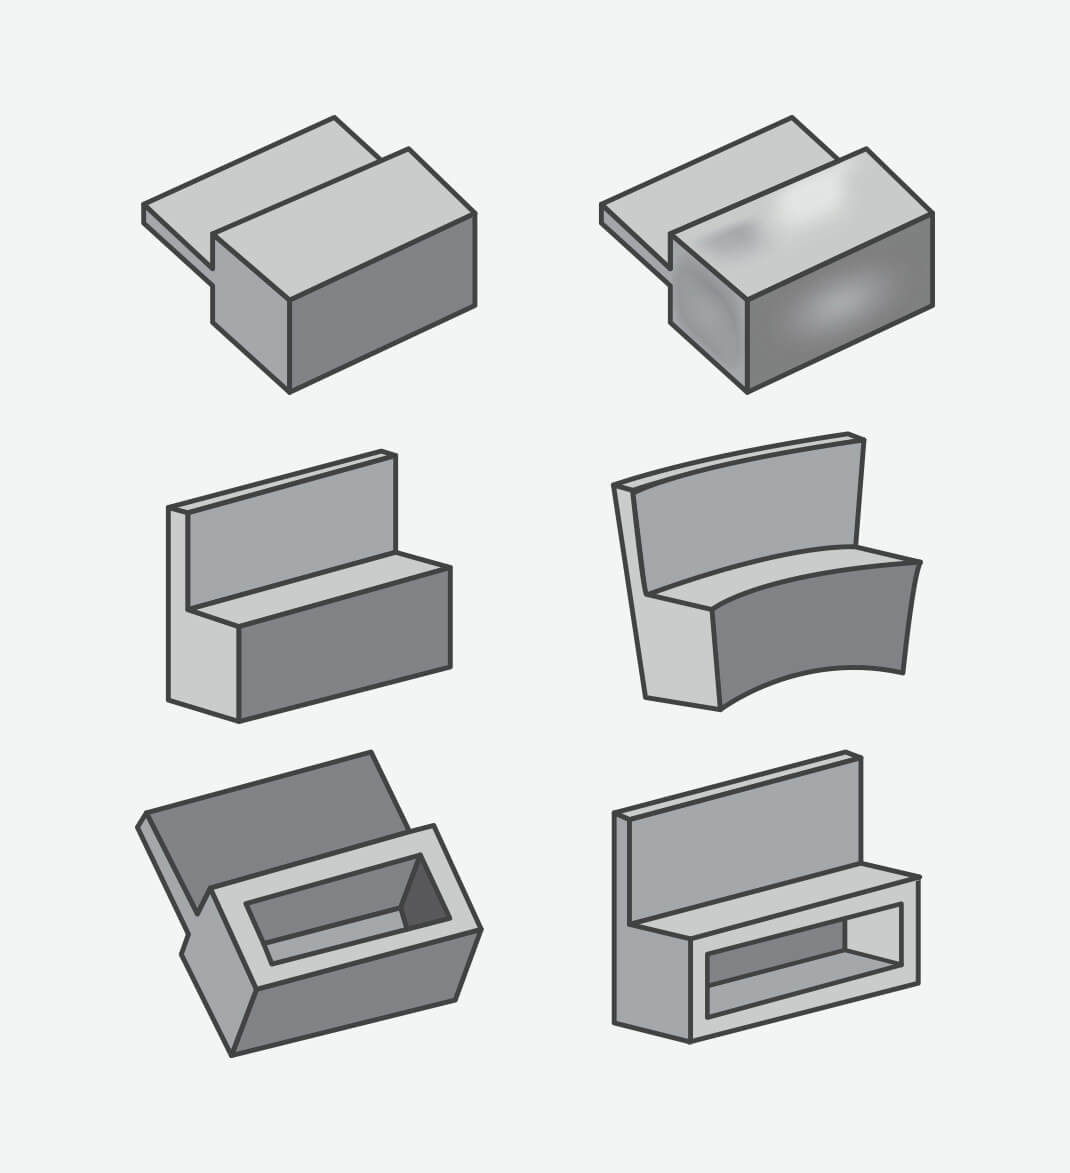 The top row represents a part designed with thick features and the resulting sink once molded. The middle row also shows a part designed with thick features, but this time the warp that occurs once molded. The bottom row demonstrates how coring out thick features helps create an optimally molded part.